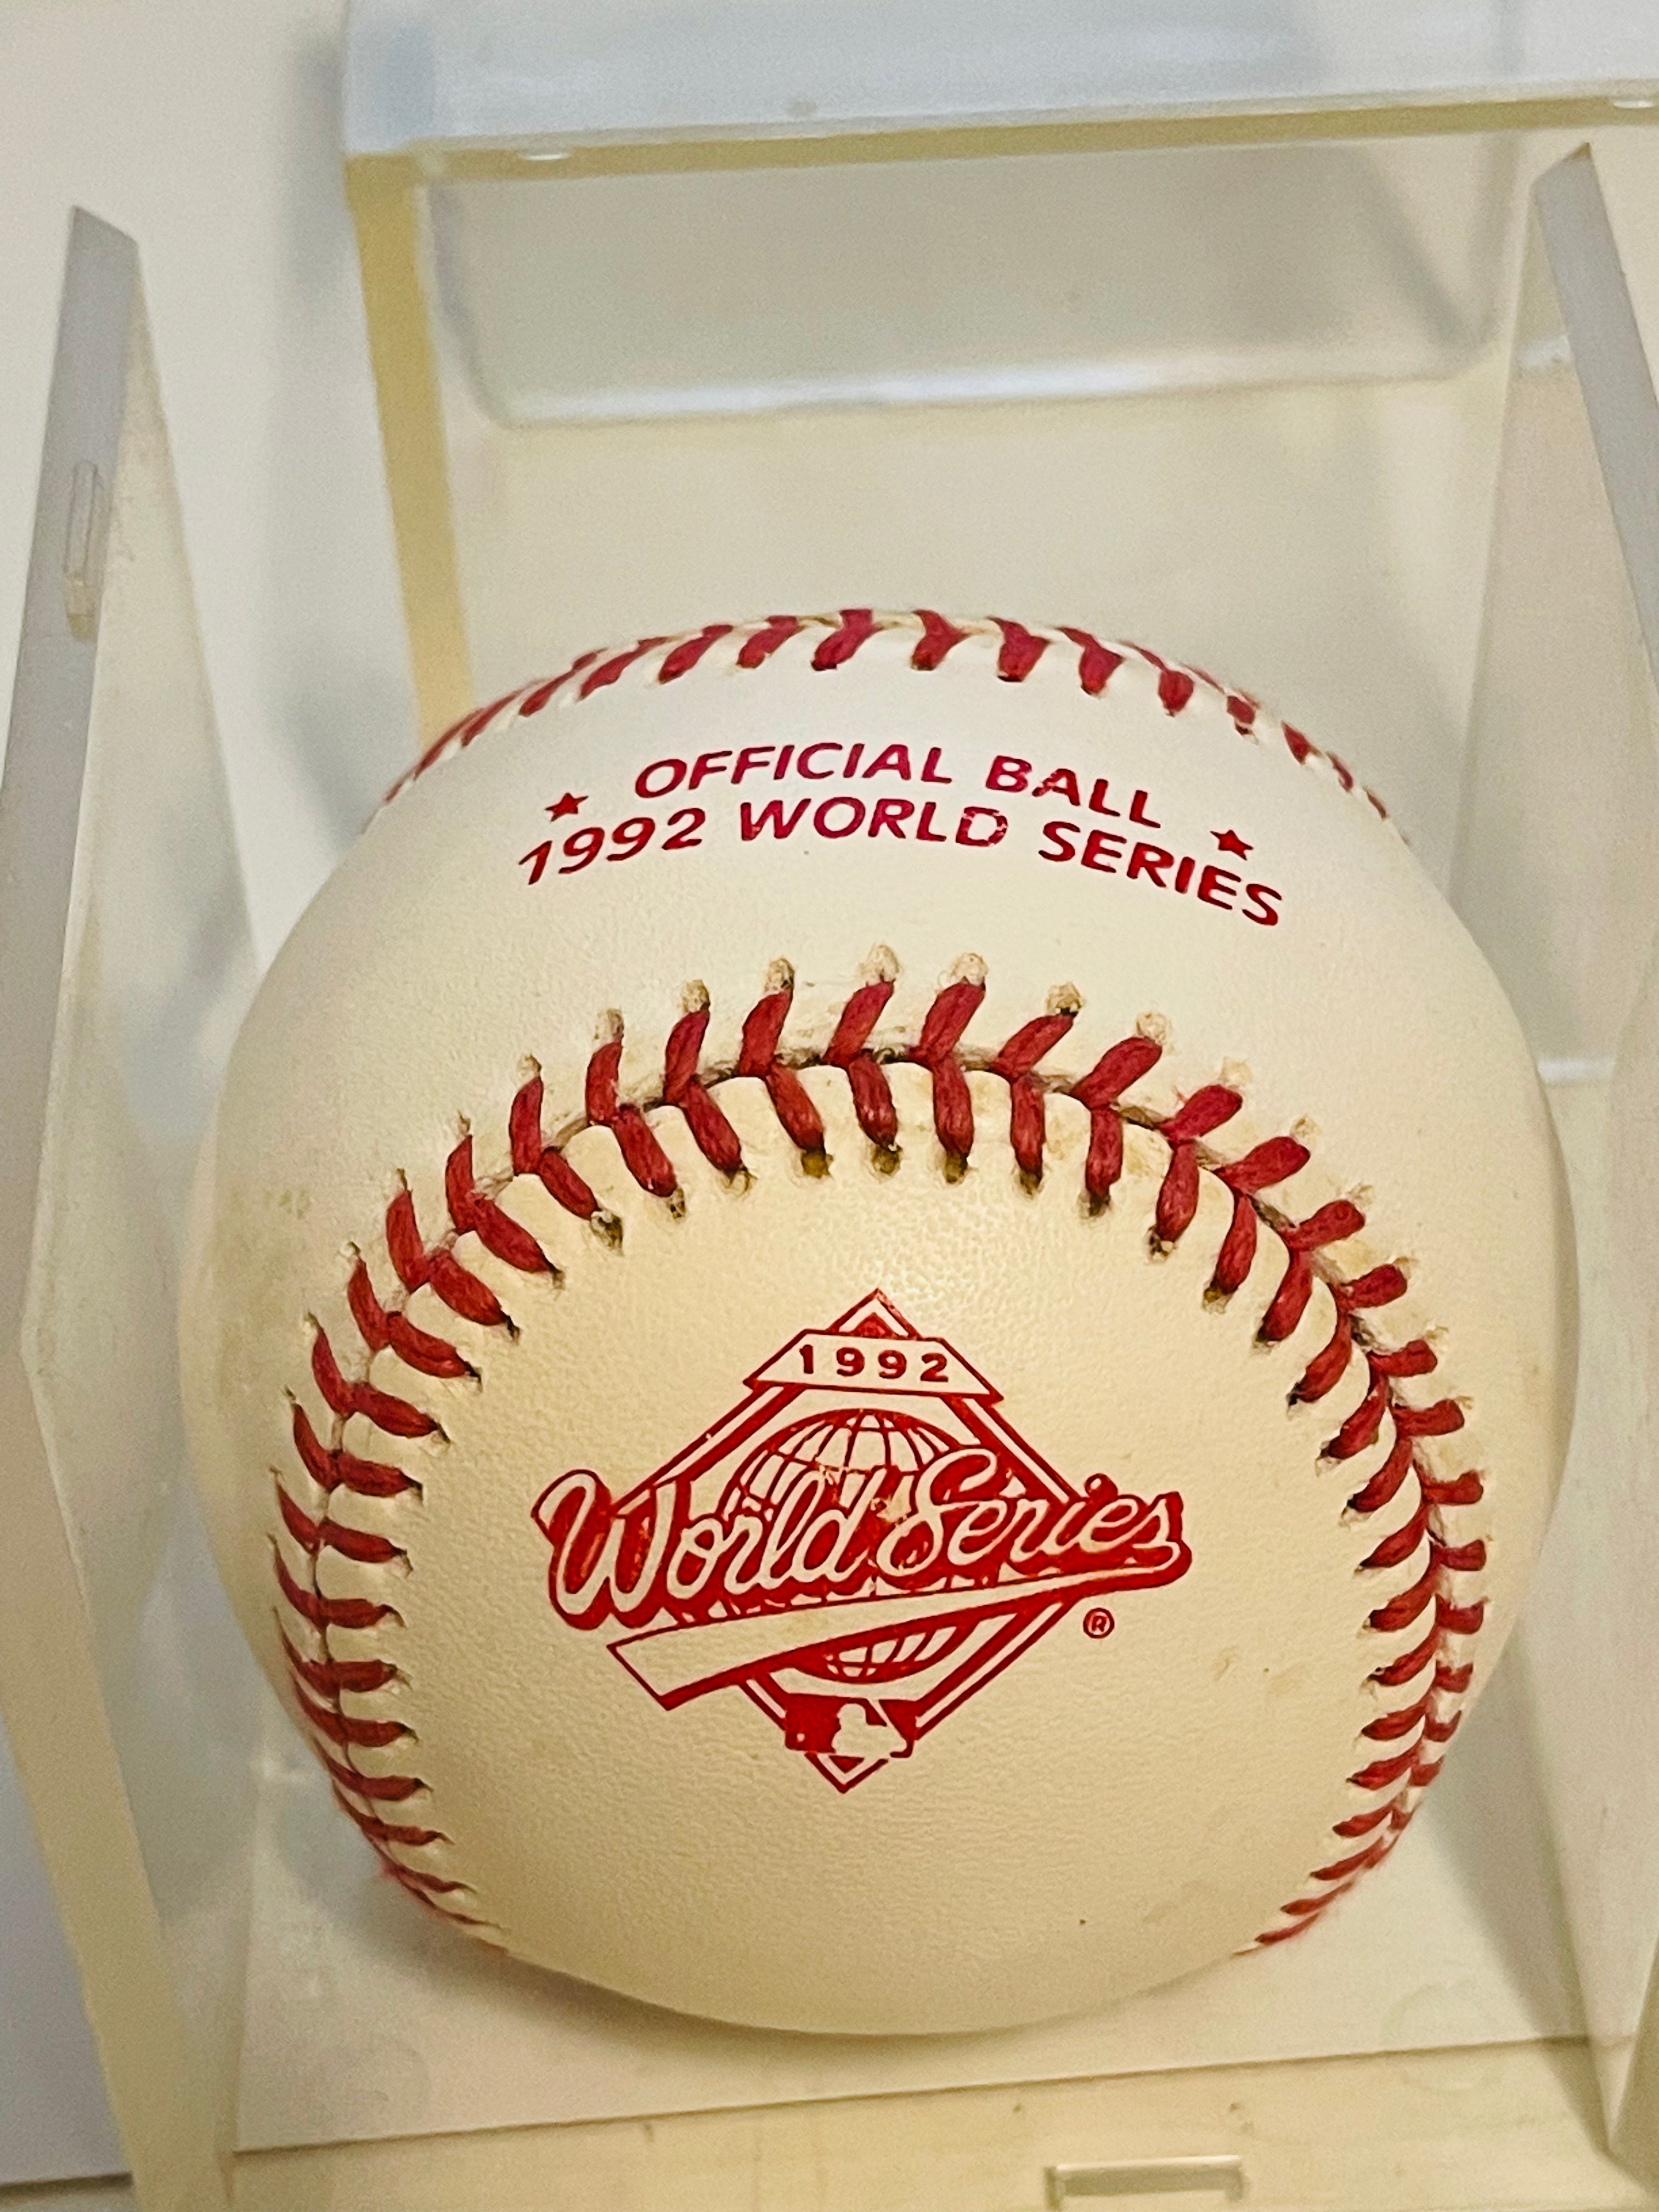 1992 World Series unmarked vintage baseball in cube